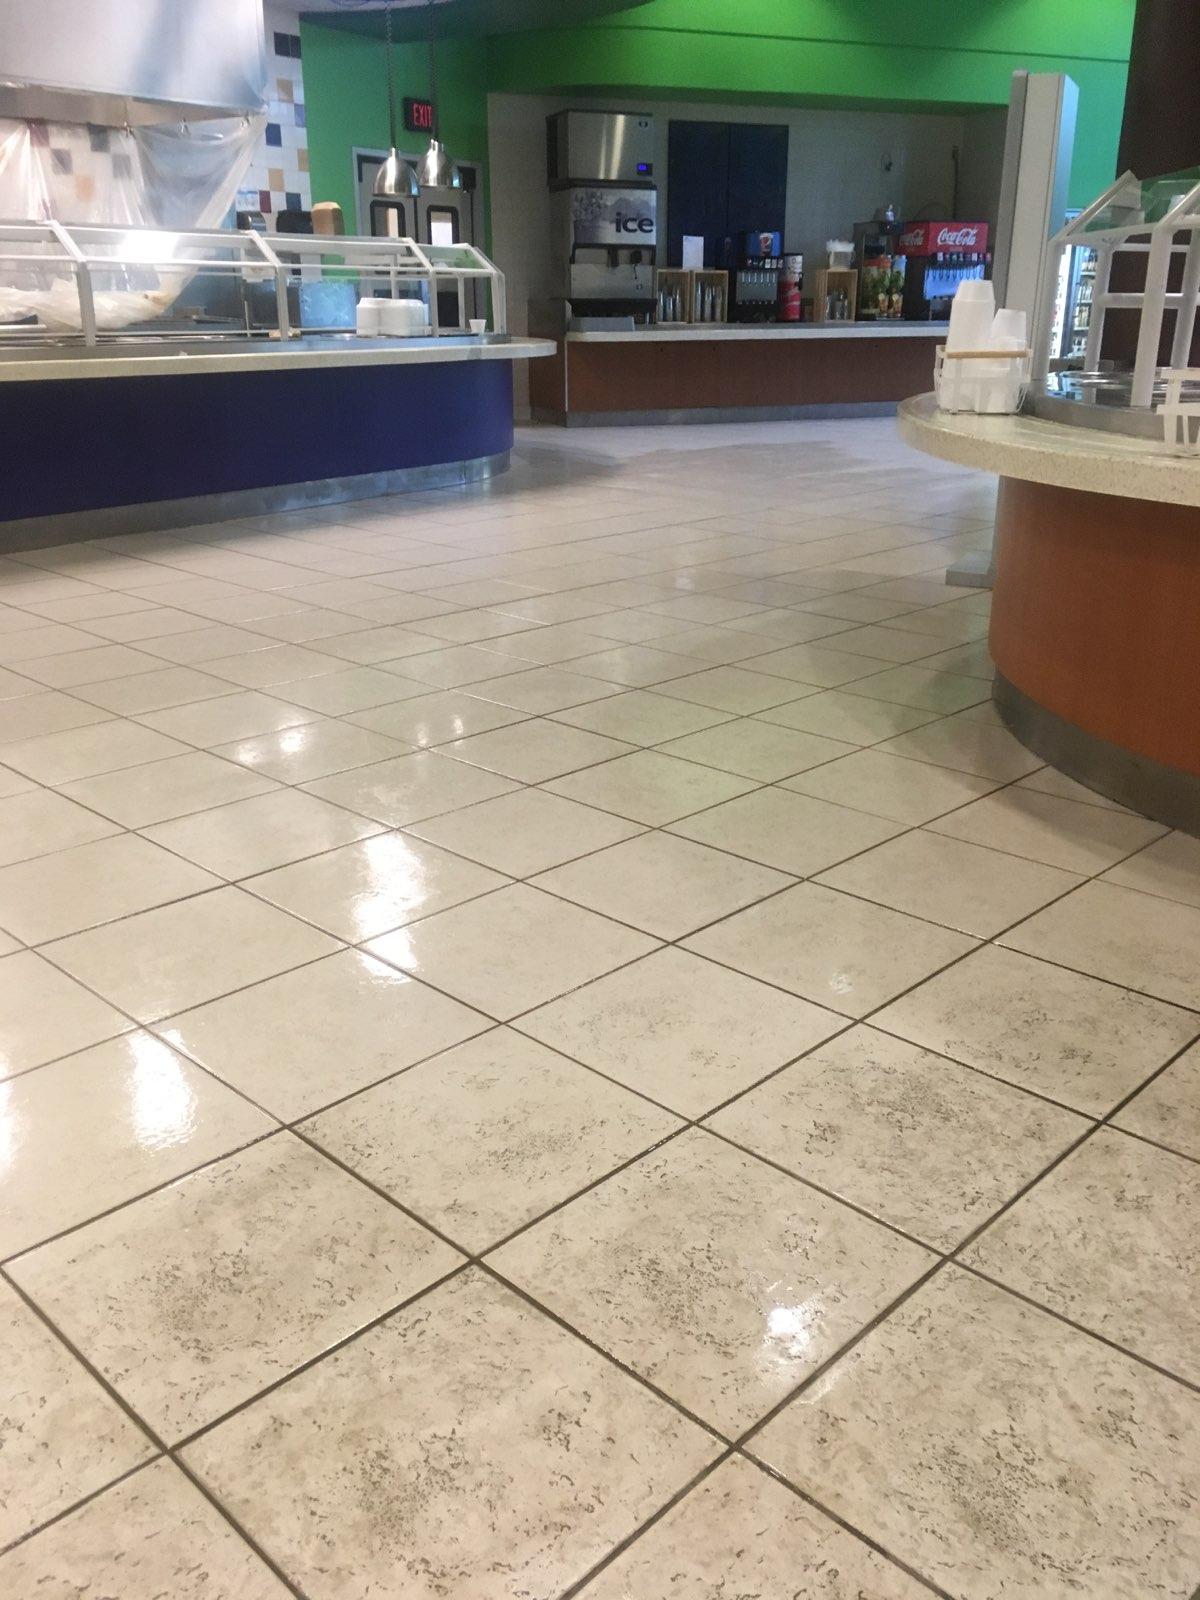 https://laniorcarpetcleaning.com/wp-content/uploads/2019/12/Tile-and-grout-cleaning-in-tampa.jpg